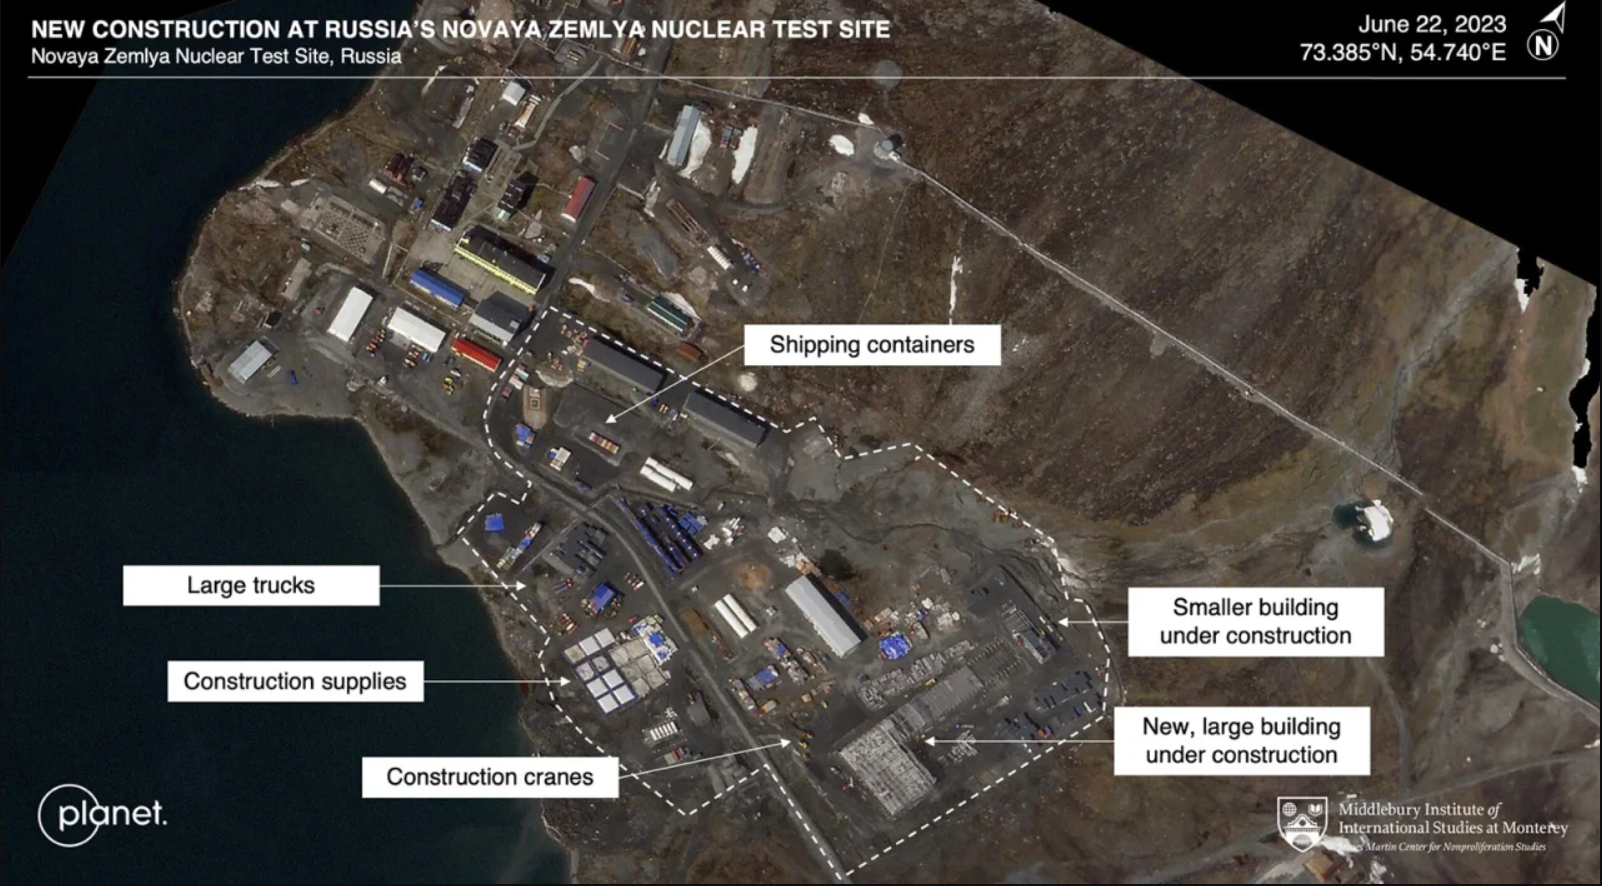 New facilities and tunnels: Russia, the US, and China are actively building nuclear test sites. Satellite photos